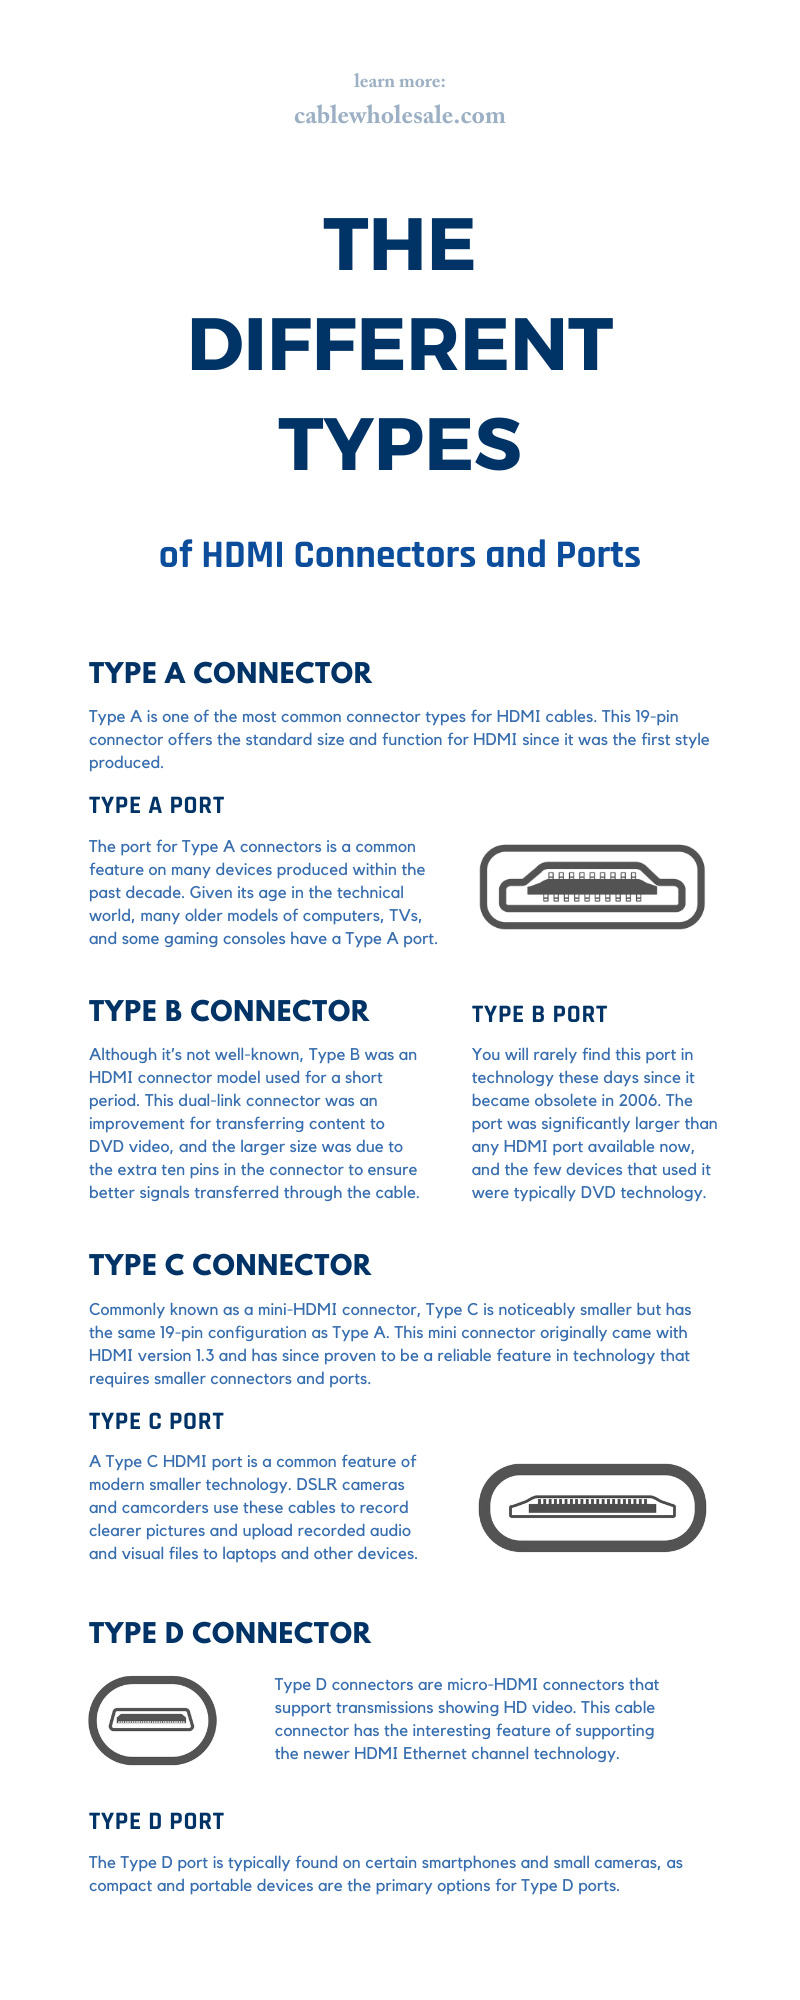 The Different Types of HDMI Connectors and Ports